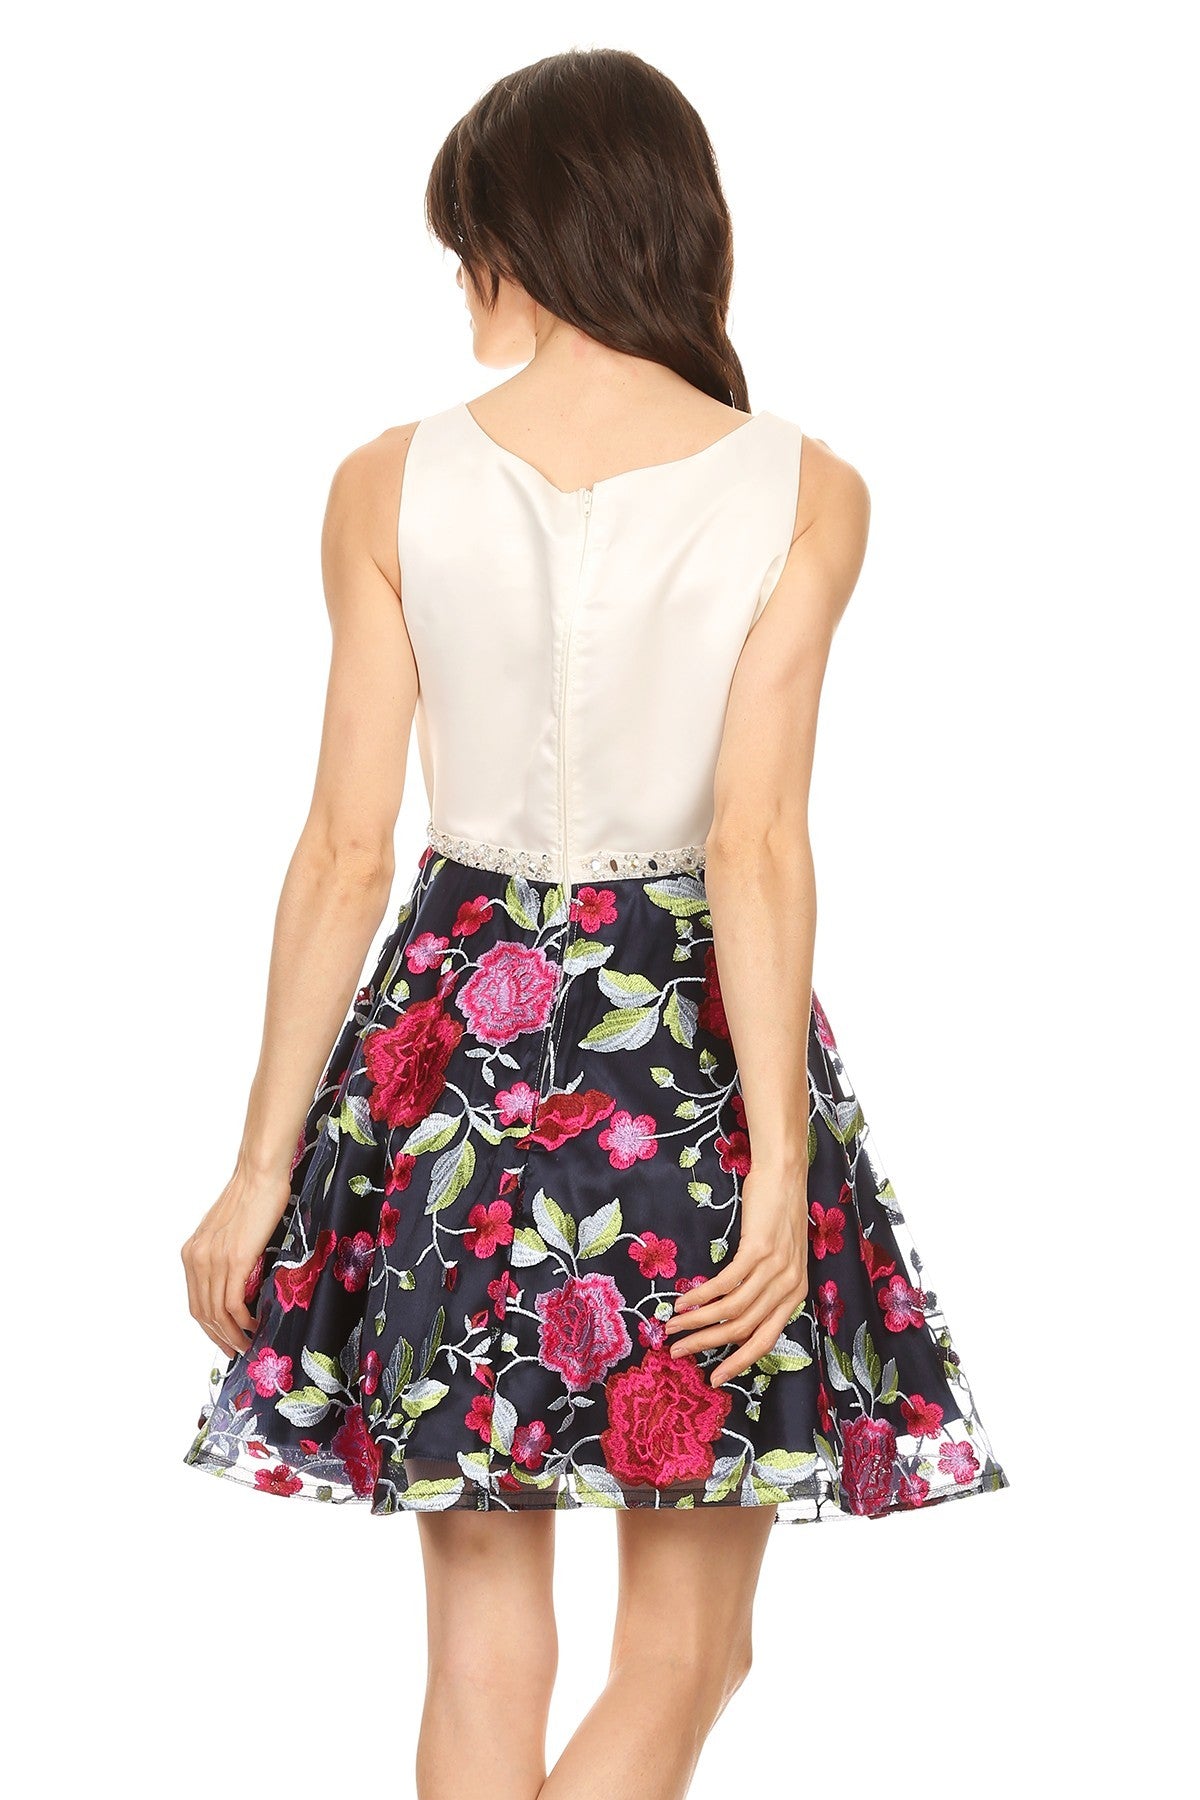 Floral Skirt Solid Bodice Midi